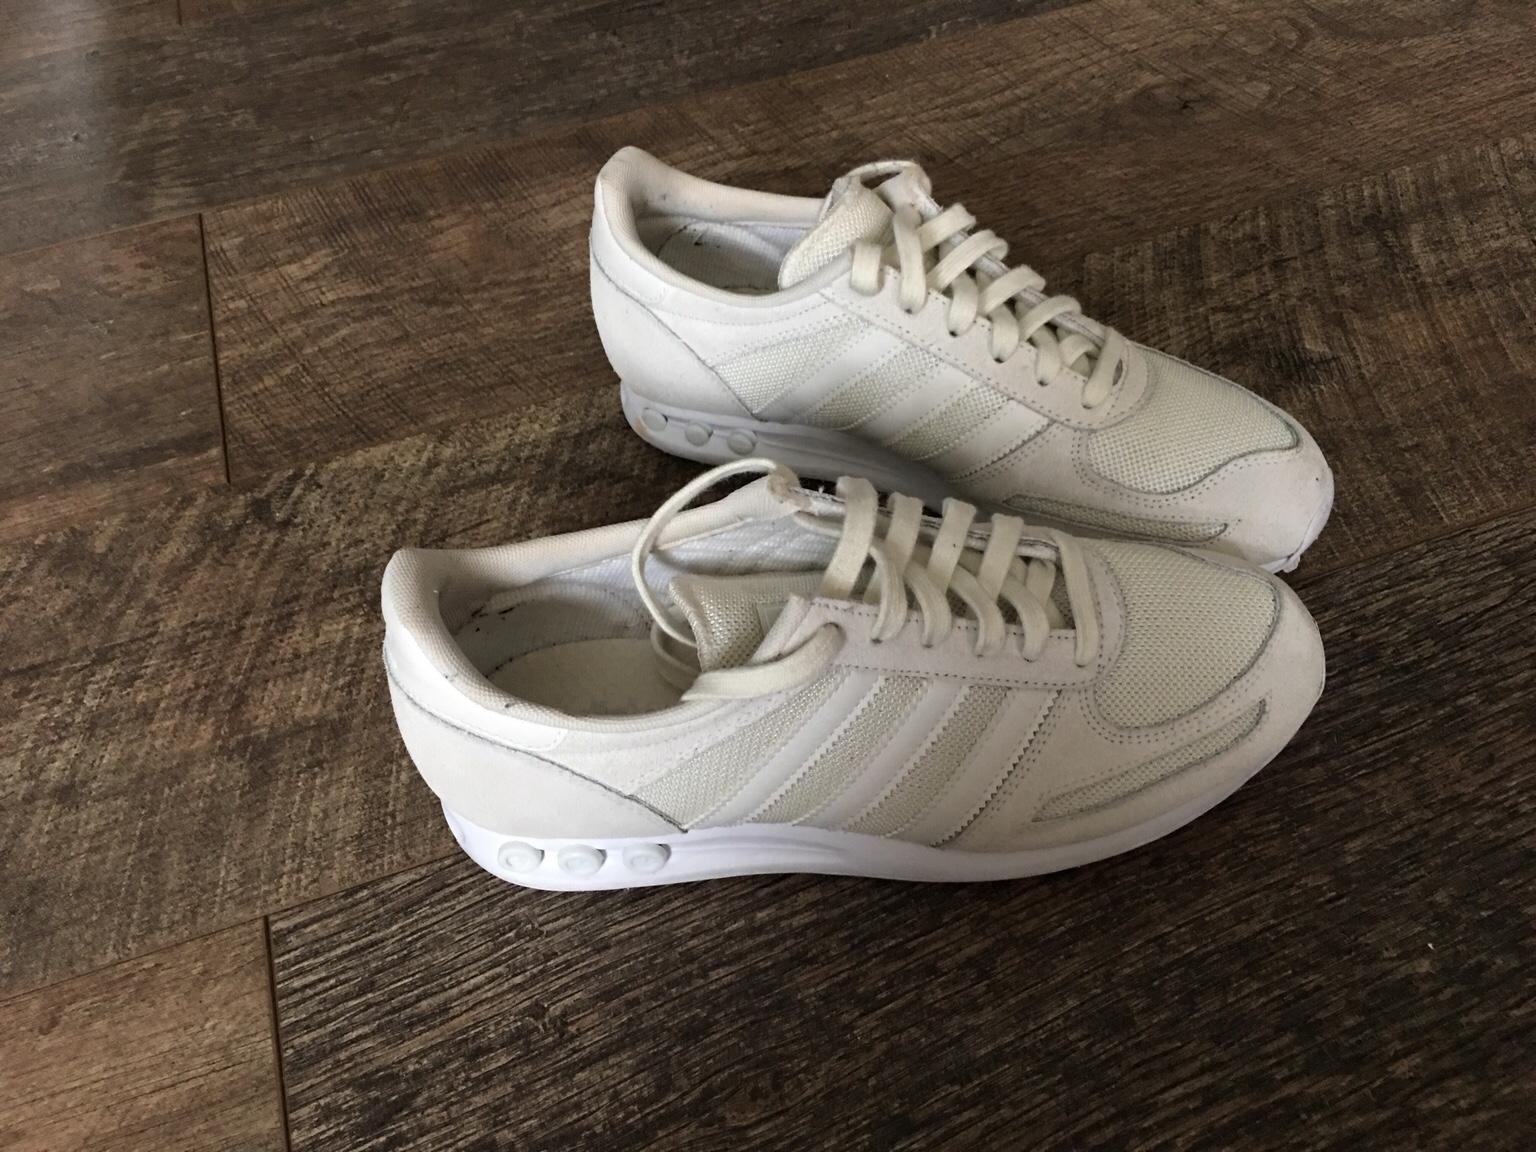 Adidas La Trainer In Oldham For 30 00 For Sale Shpock